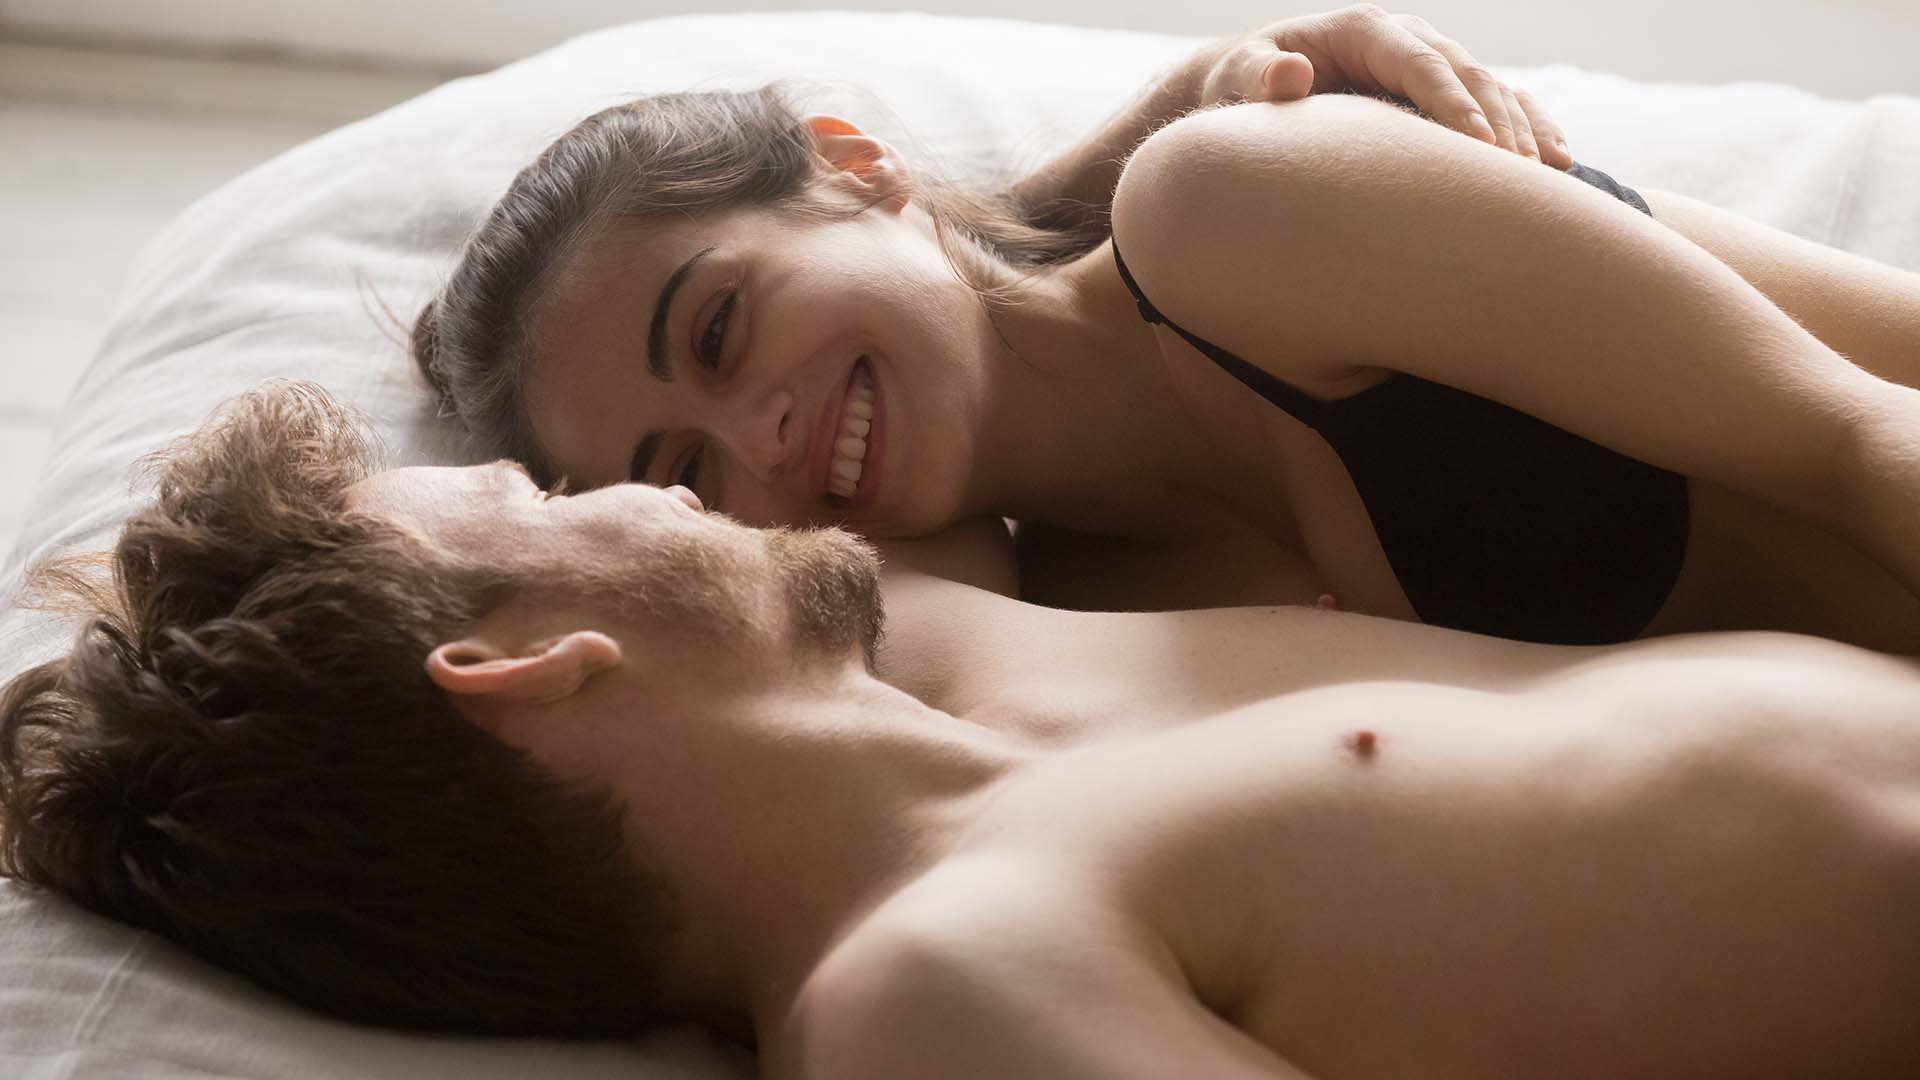 Brunette man and woman lying in bed together and smiling while conversing in their underwear. White sheets.